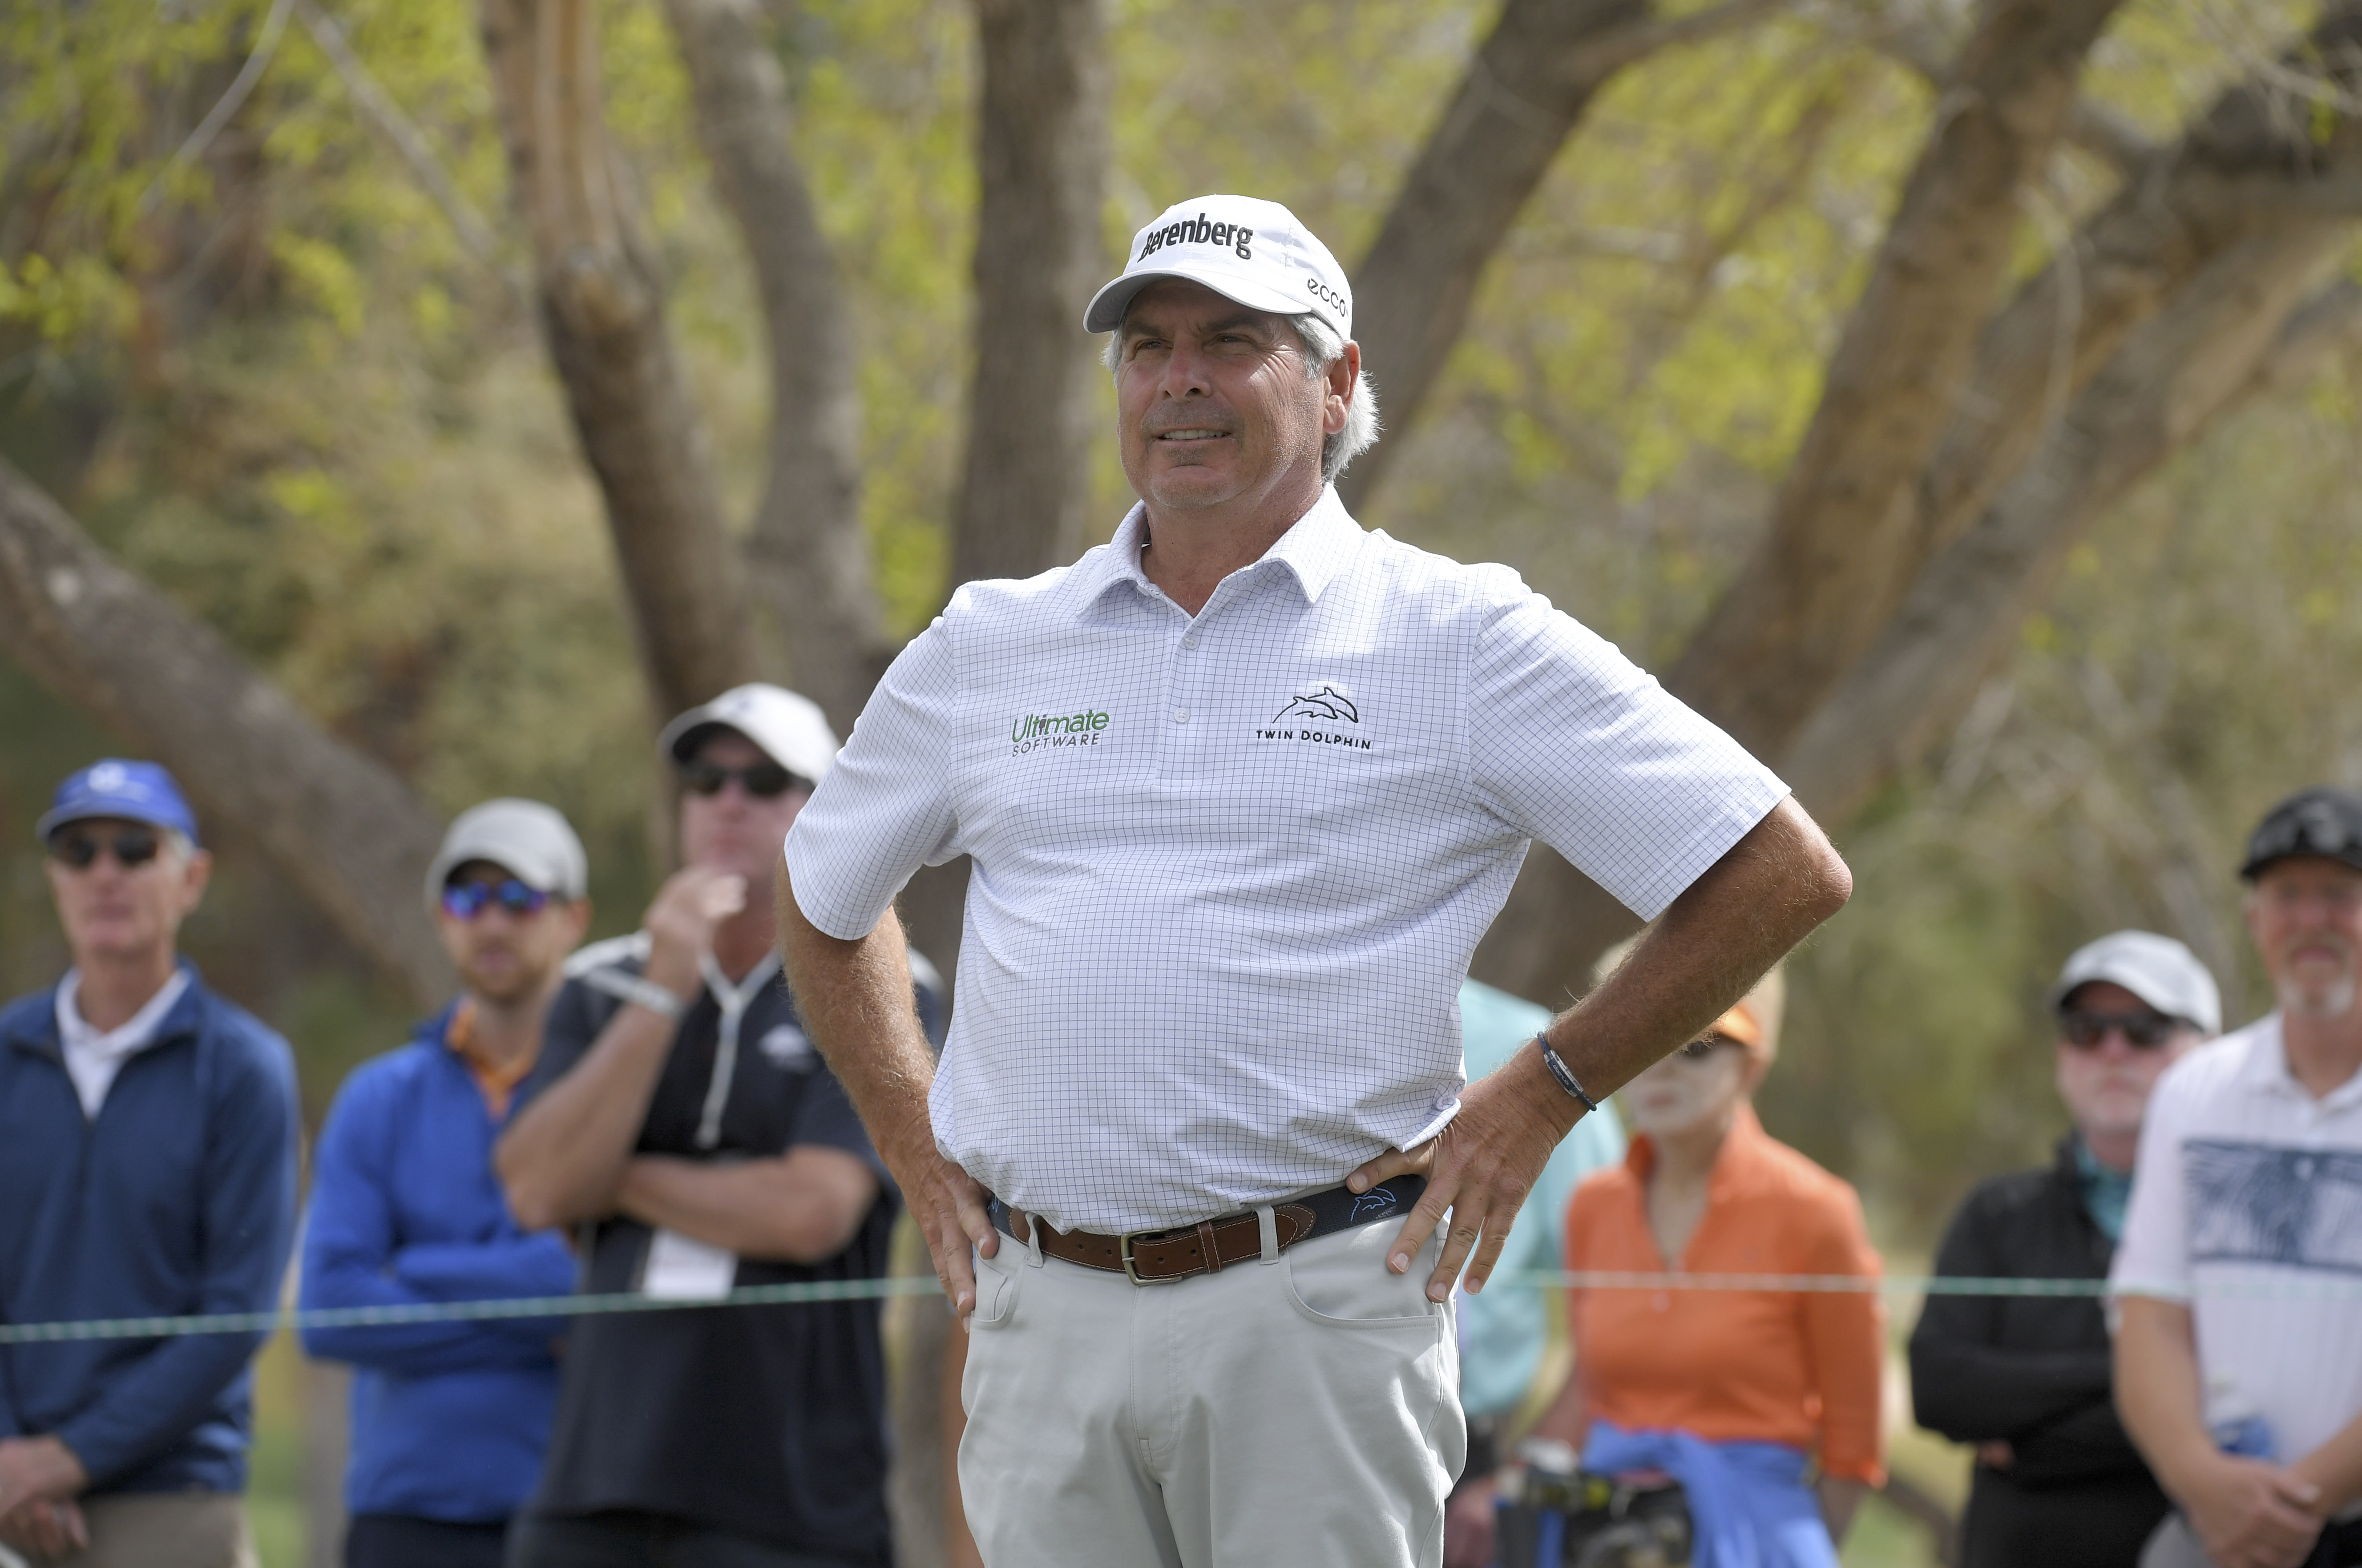 How Golfer Fred Couples Tragically Lost Both of His Parents and 2 Ex-Wives: ‘I Tried Very Hard; I’m Exhausted’